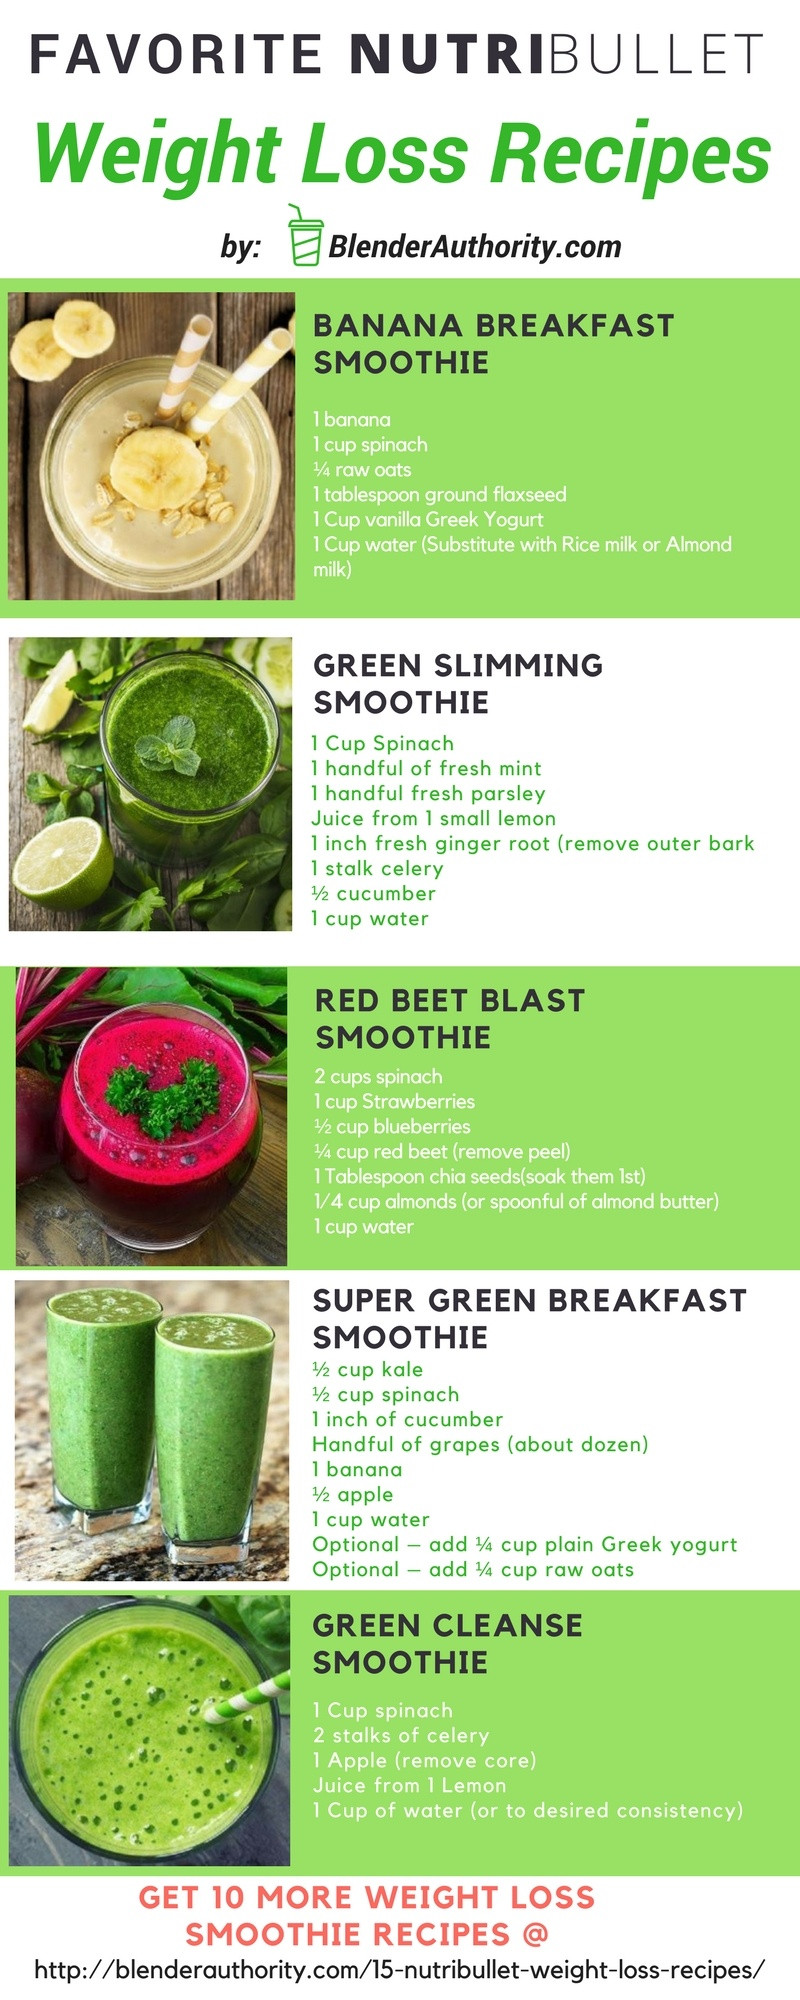 Green Smoothie Weight Loss Recipes
 Weight Loss Green Smoothie Recipes Uk